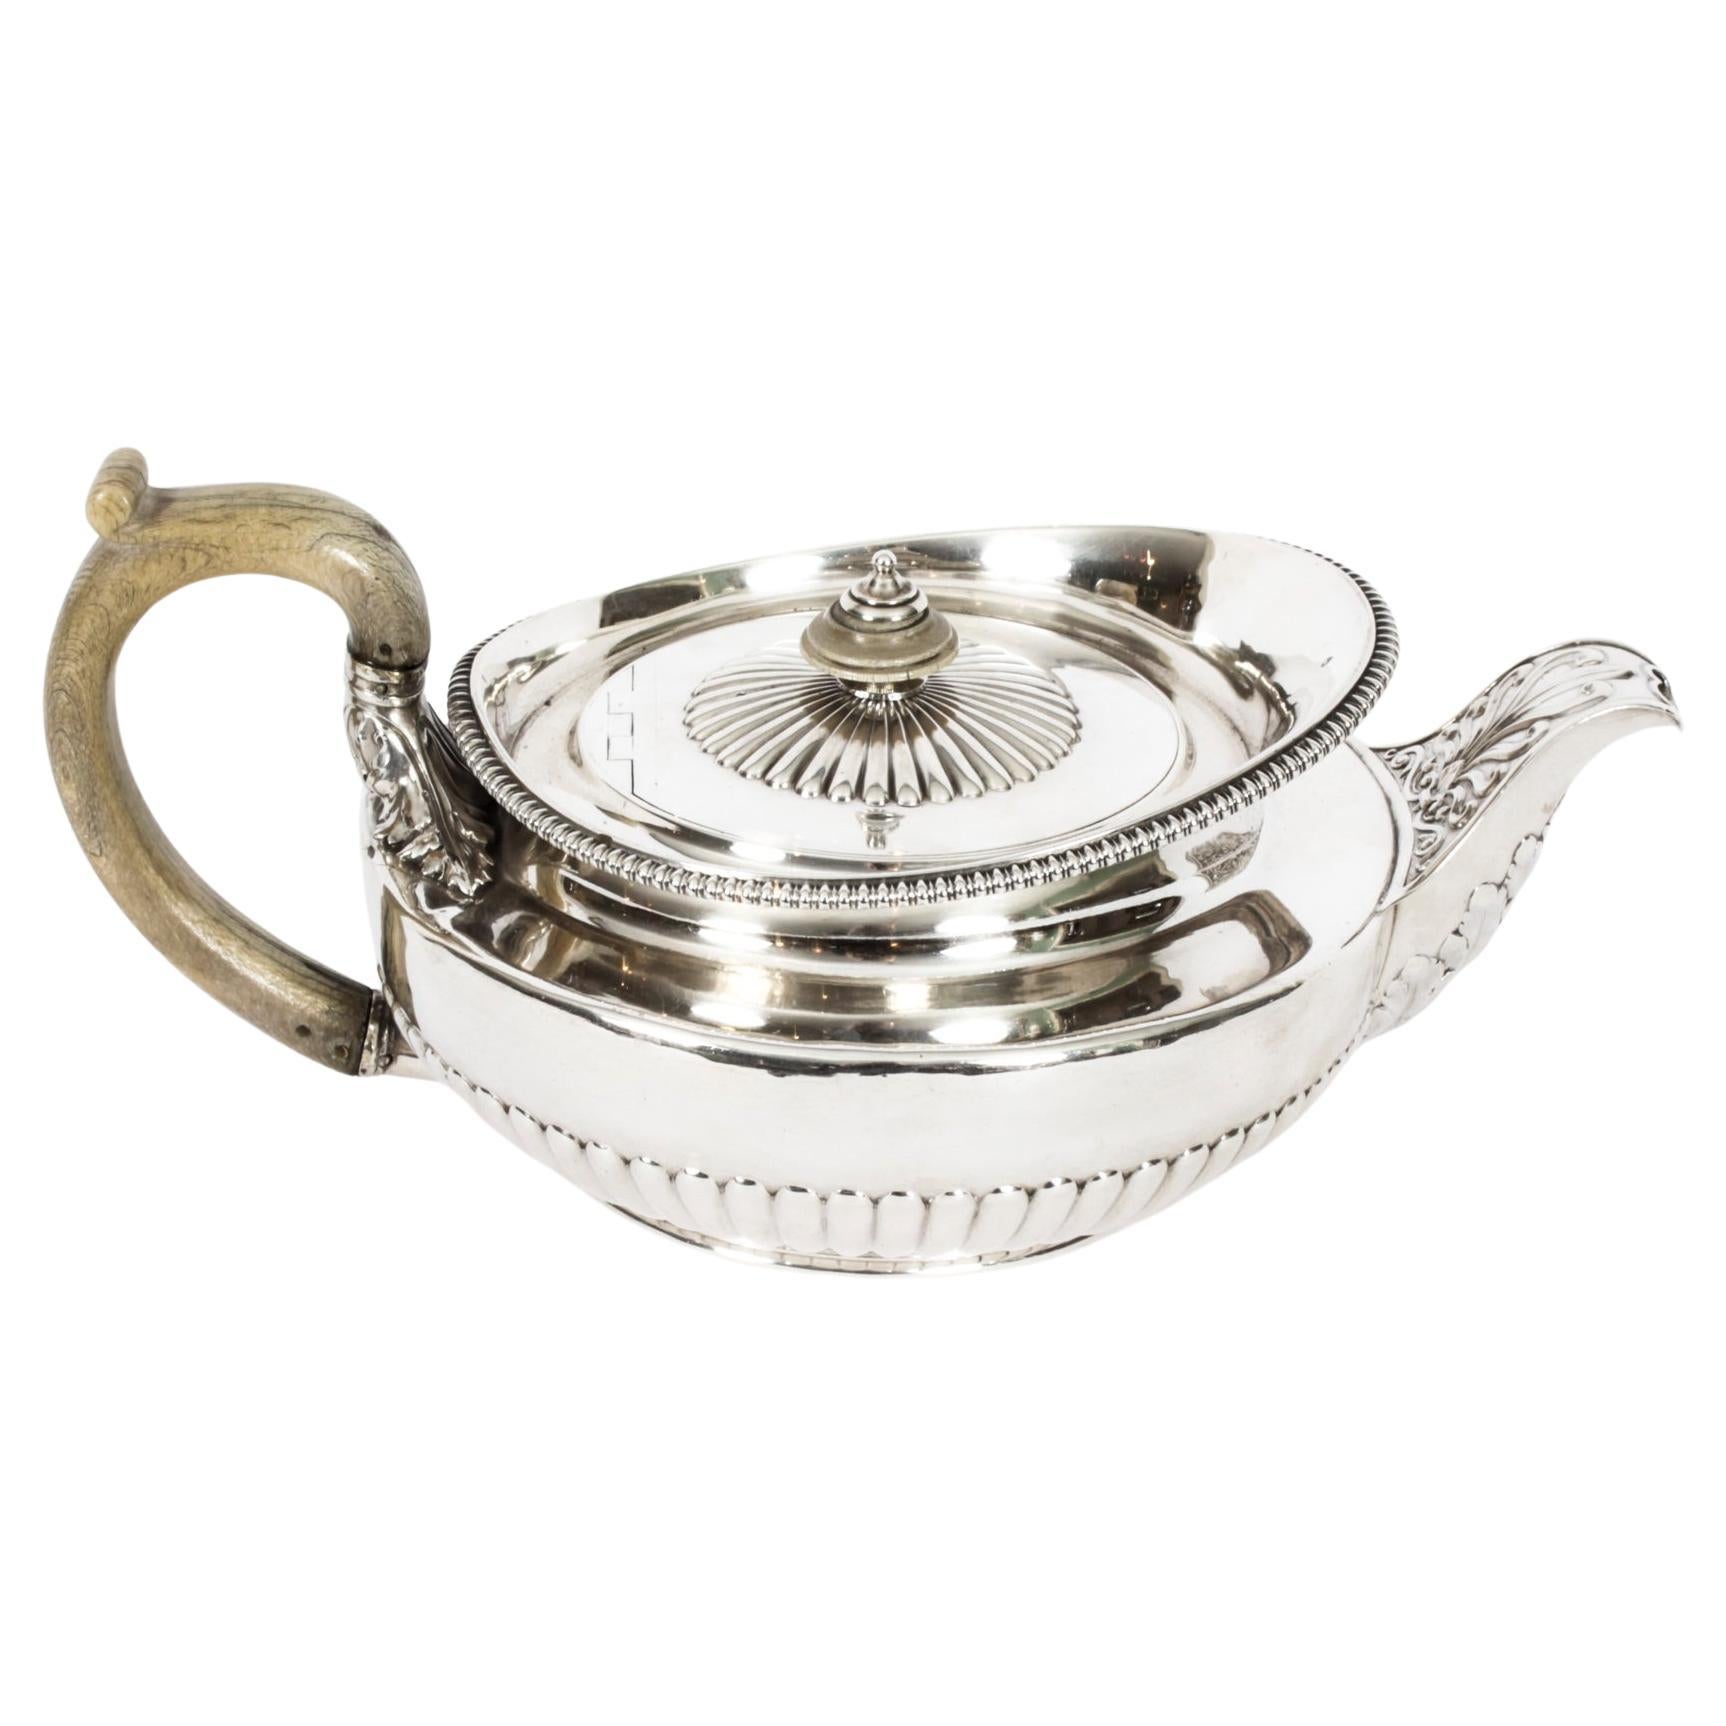 Antique Rare Georgian Sterling Silver Teapot by Paul Storr 1817, 19th Century For Sale